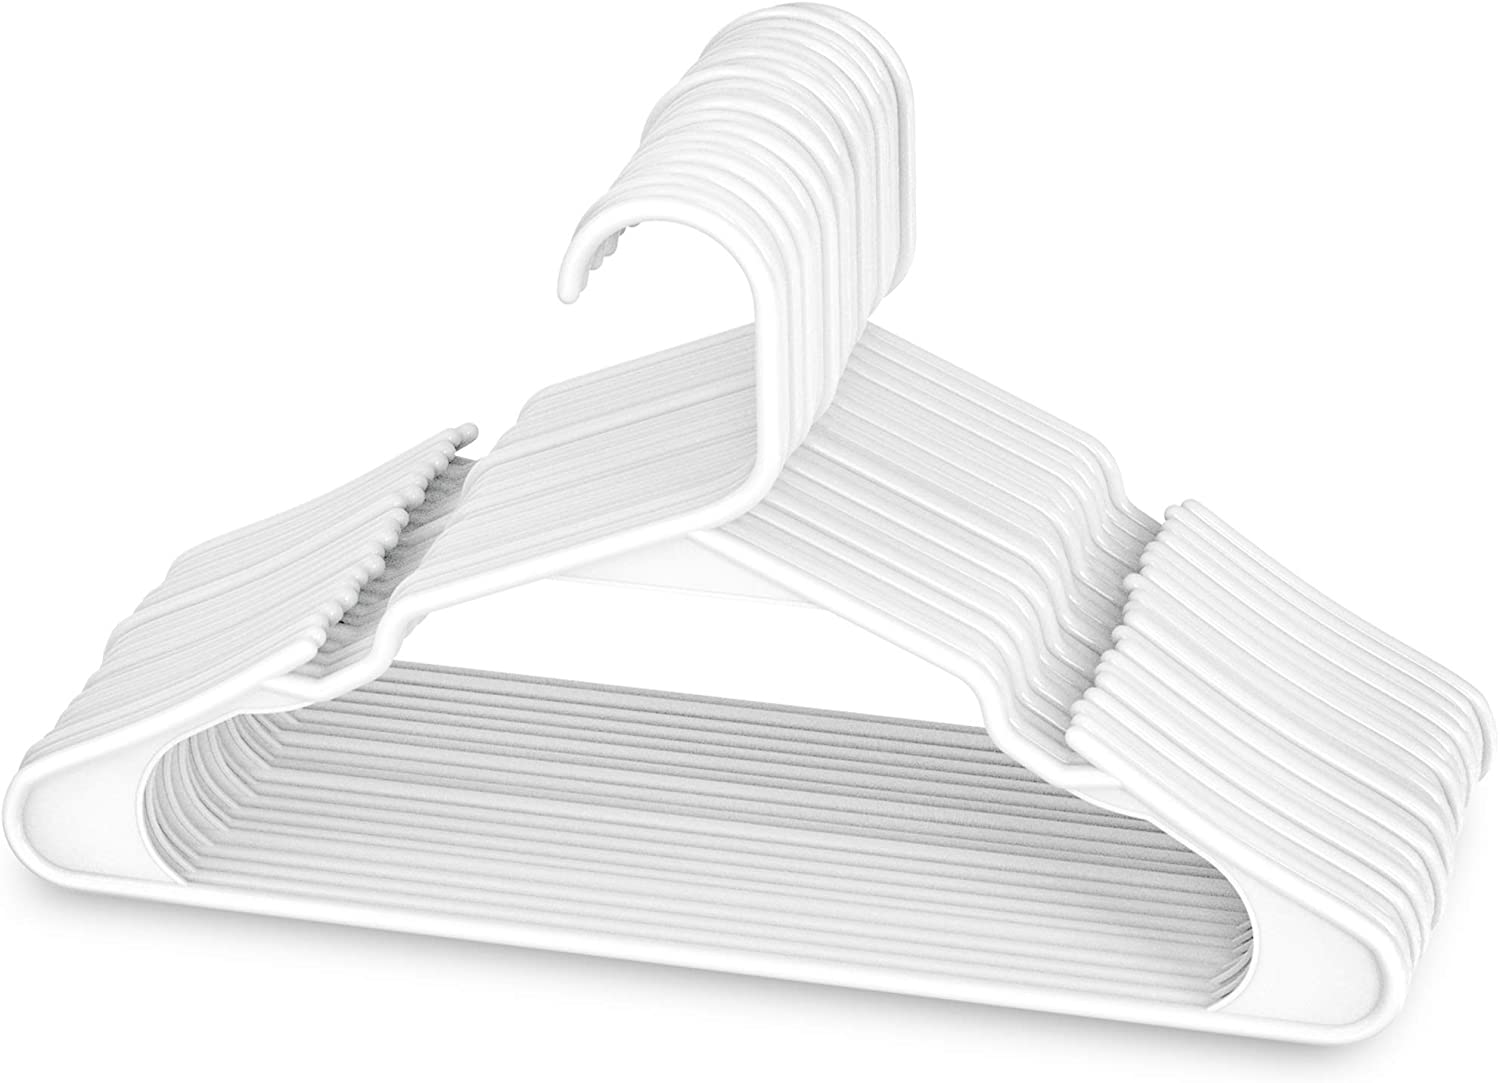 Utopia Home Clothes Hangers 50 Pack - Plastic Hangers Space Saving -  Durable Coat Hanger with Shoulder Grooves (White)